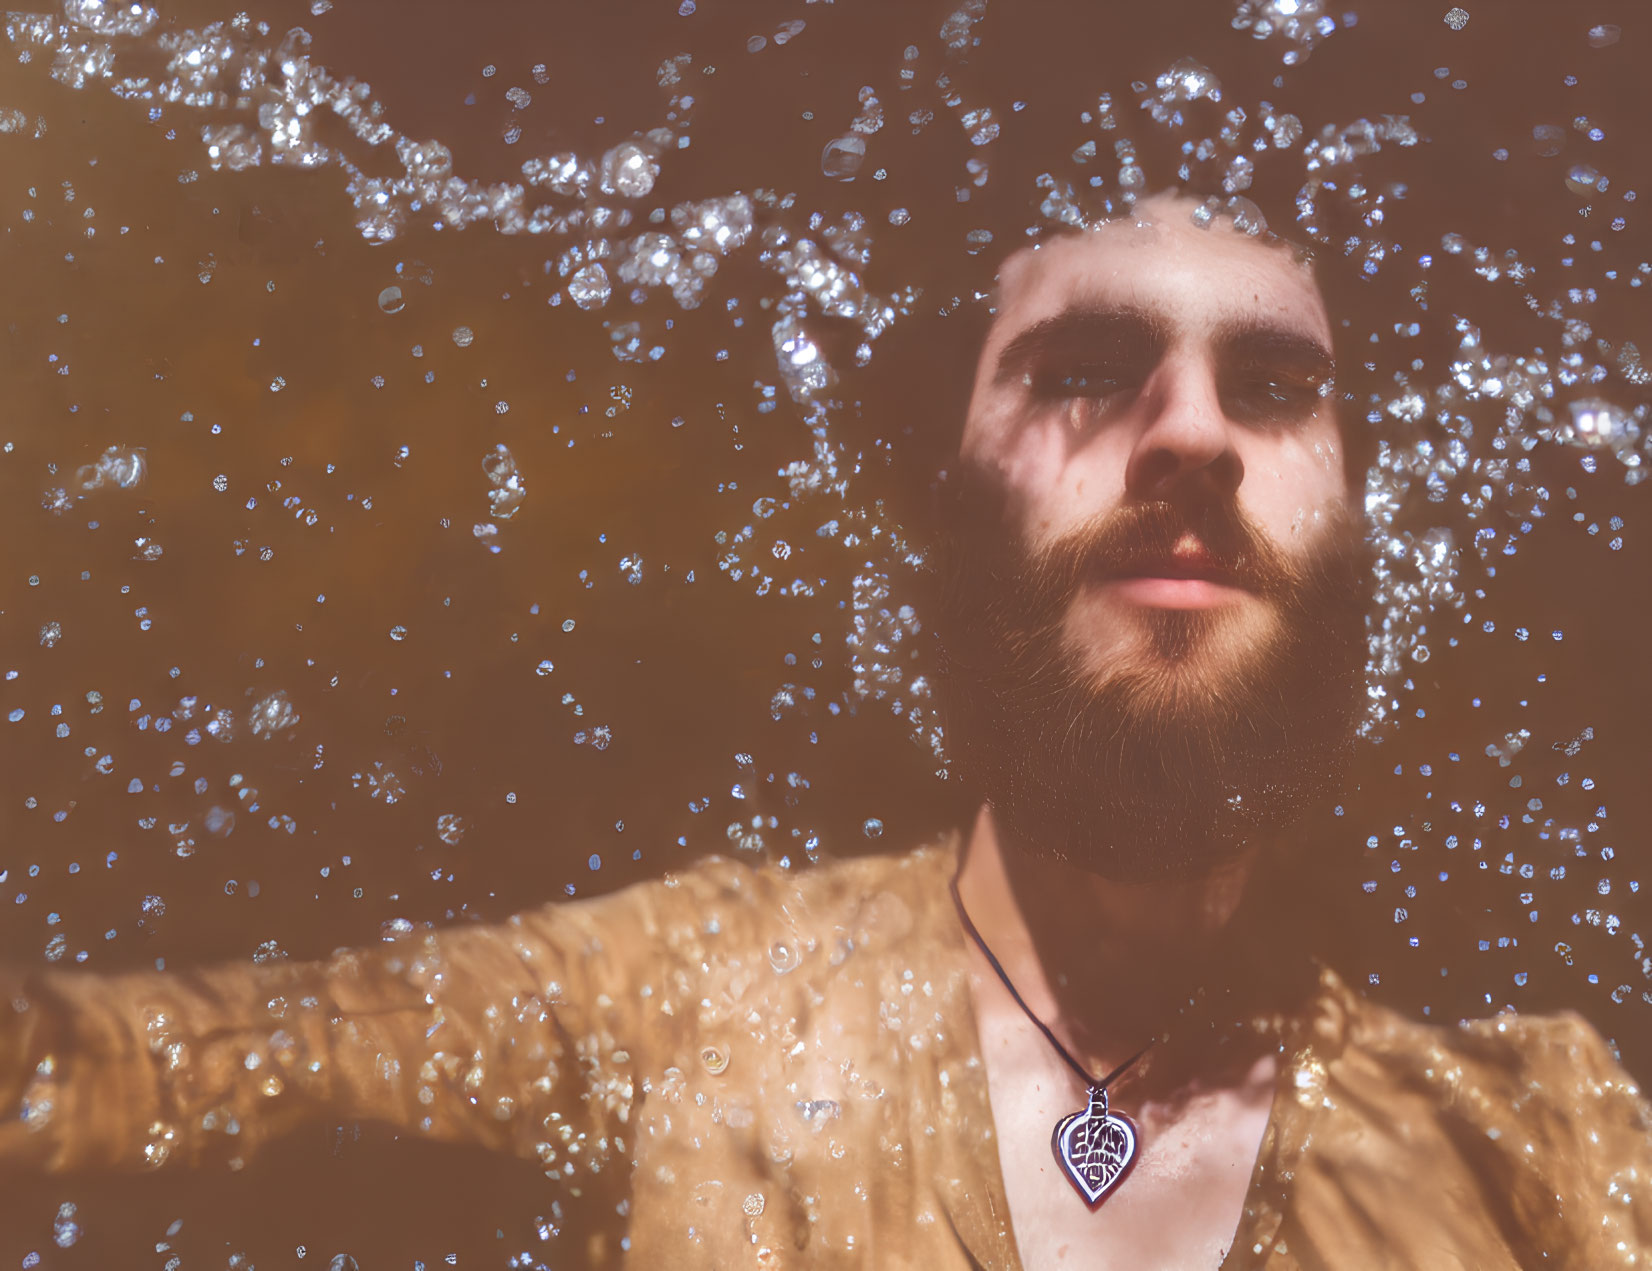 Man with beard in water, bubbles, necklace, yellow shirt, serene expression